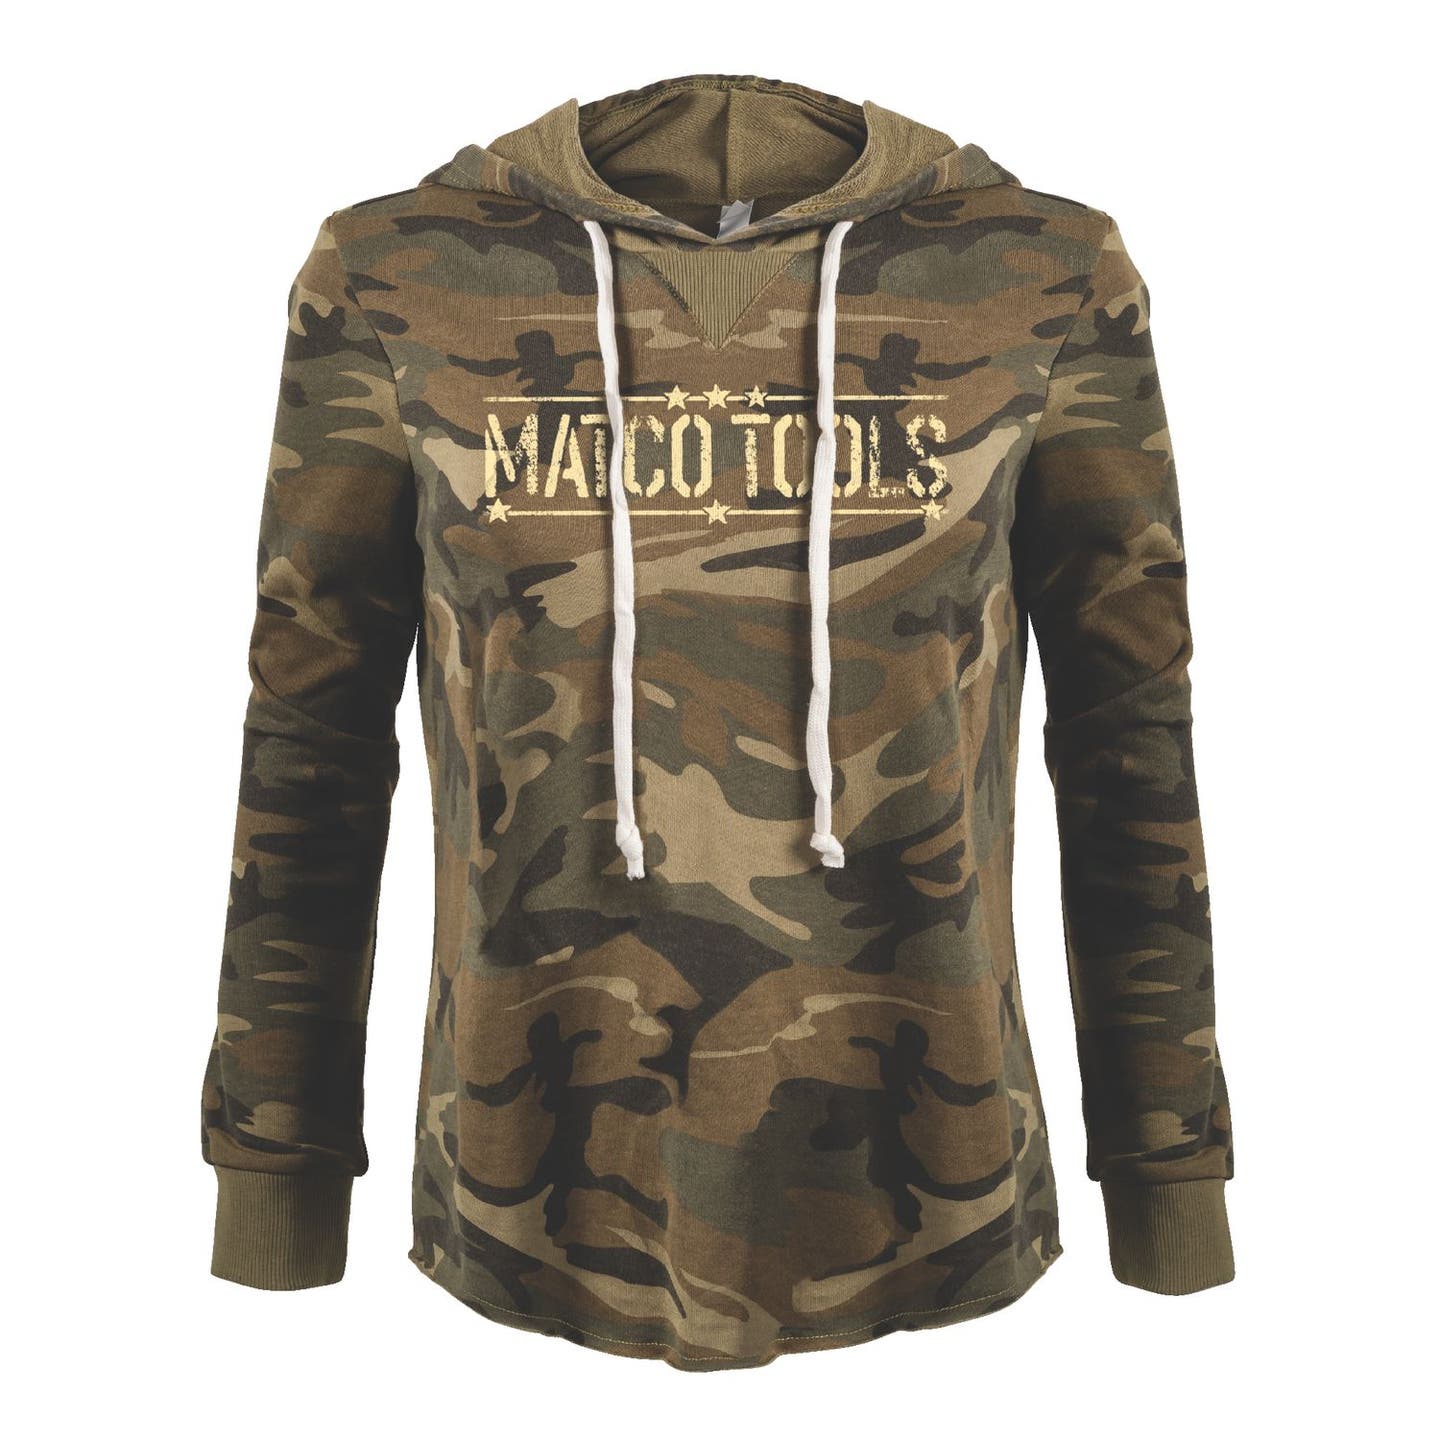 LADIES DAY OFF CAMO HOODIE - XL